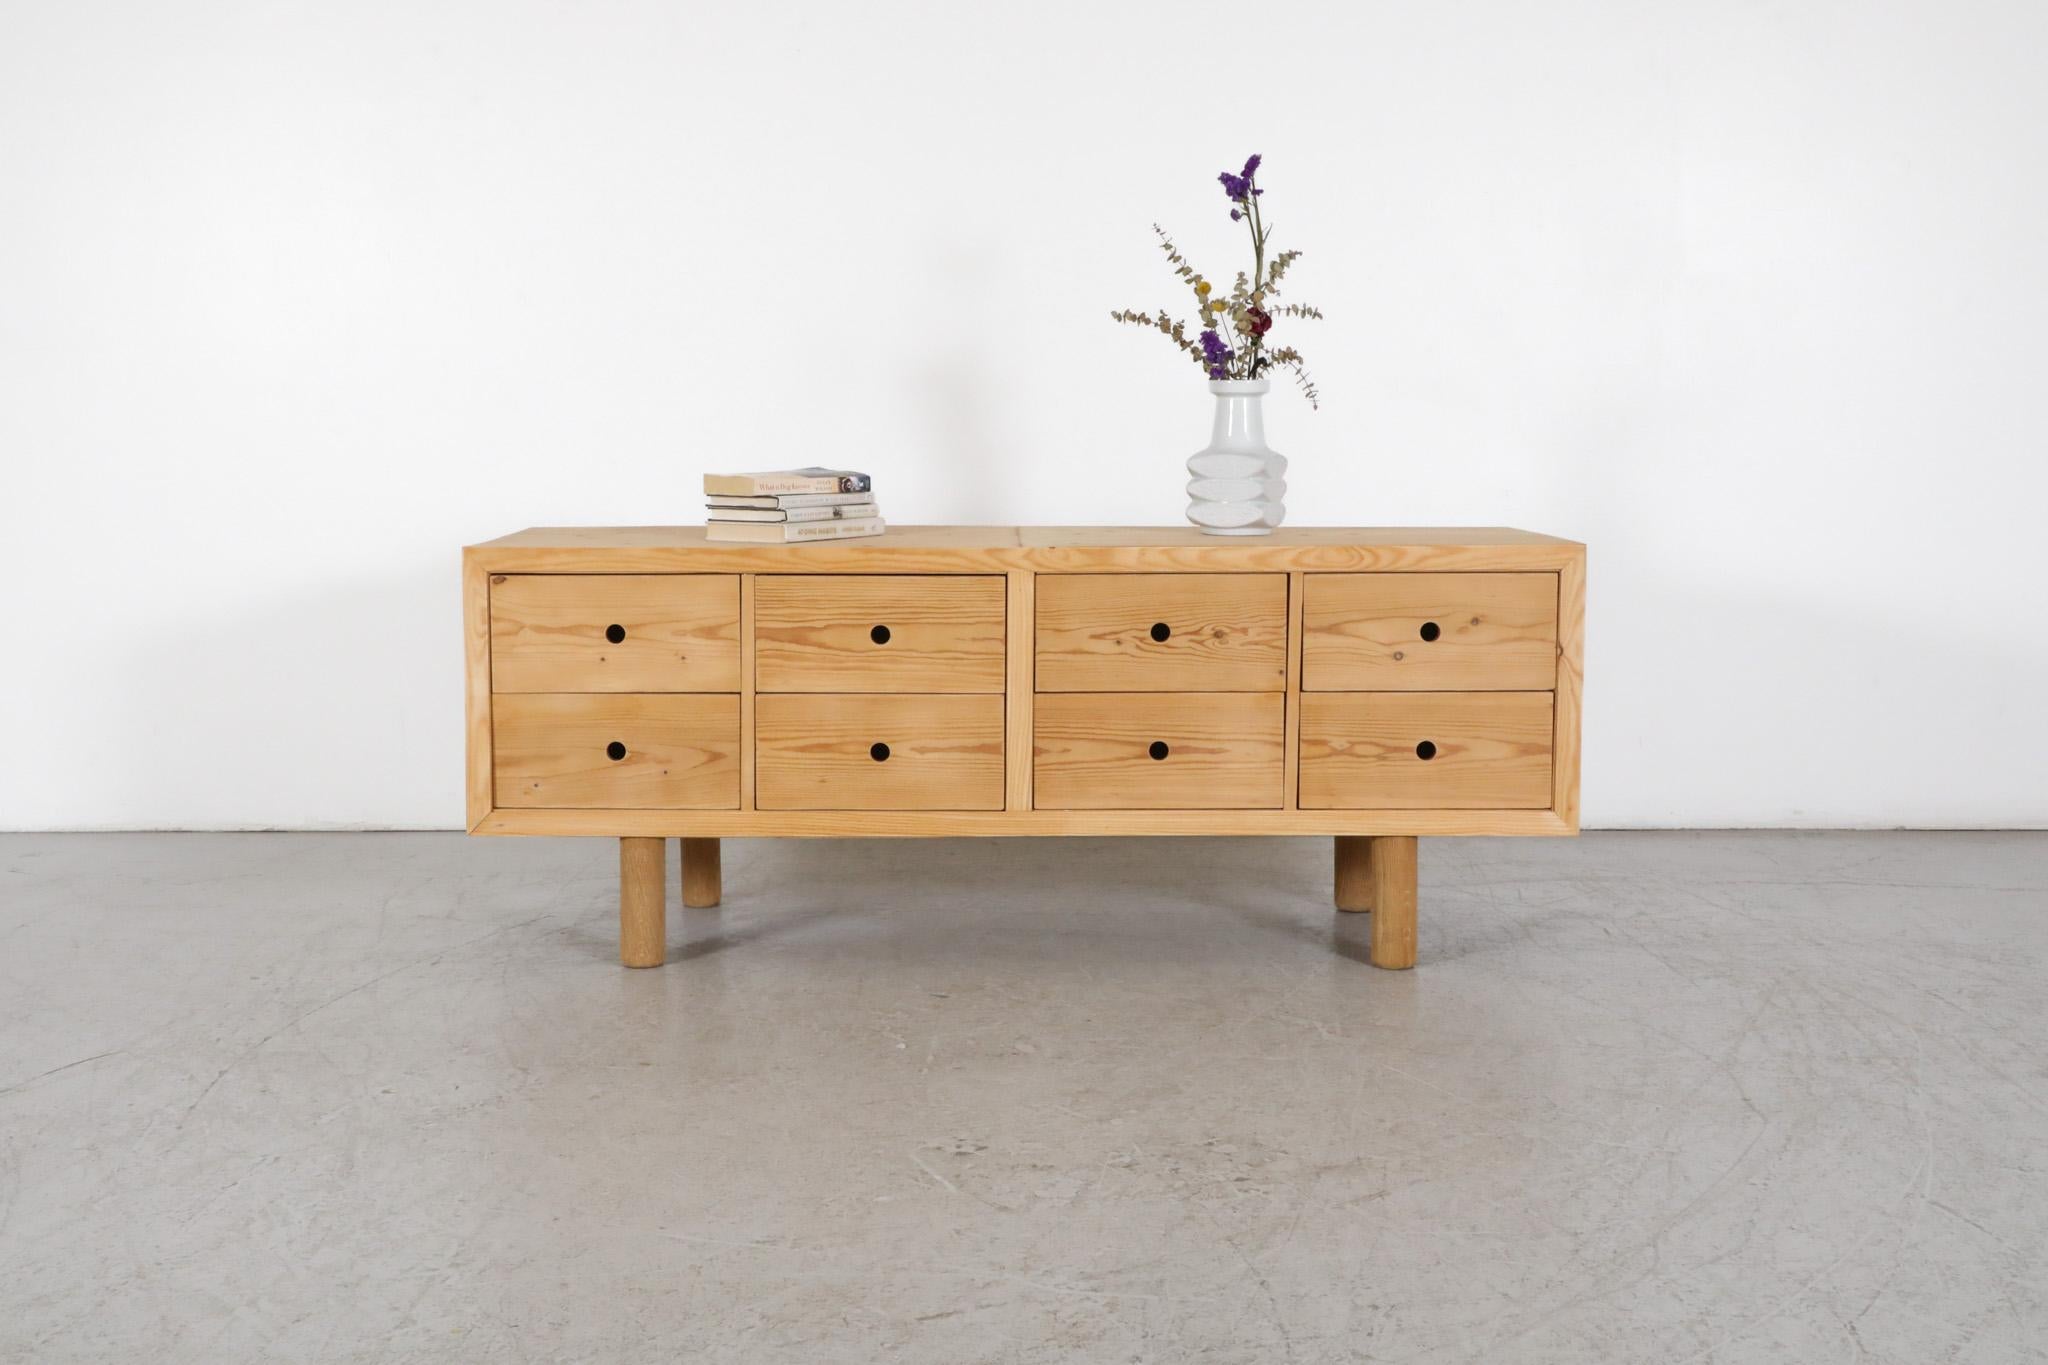 Mid-Century Danish pine credenza in the style of Ate Van Apeldoorn. Natural wood frame containing eight storage drawers with cut-out finger pulls. Lightly refinished, in otherwise original condition with age appropriate wear consistent with regular